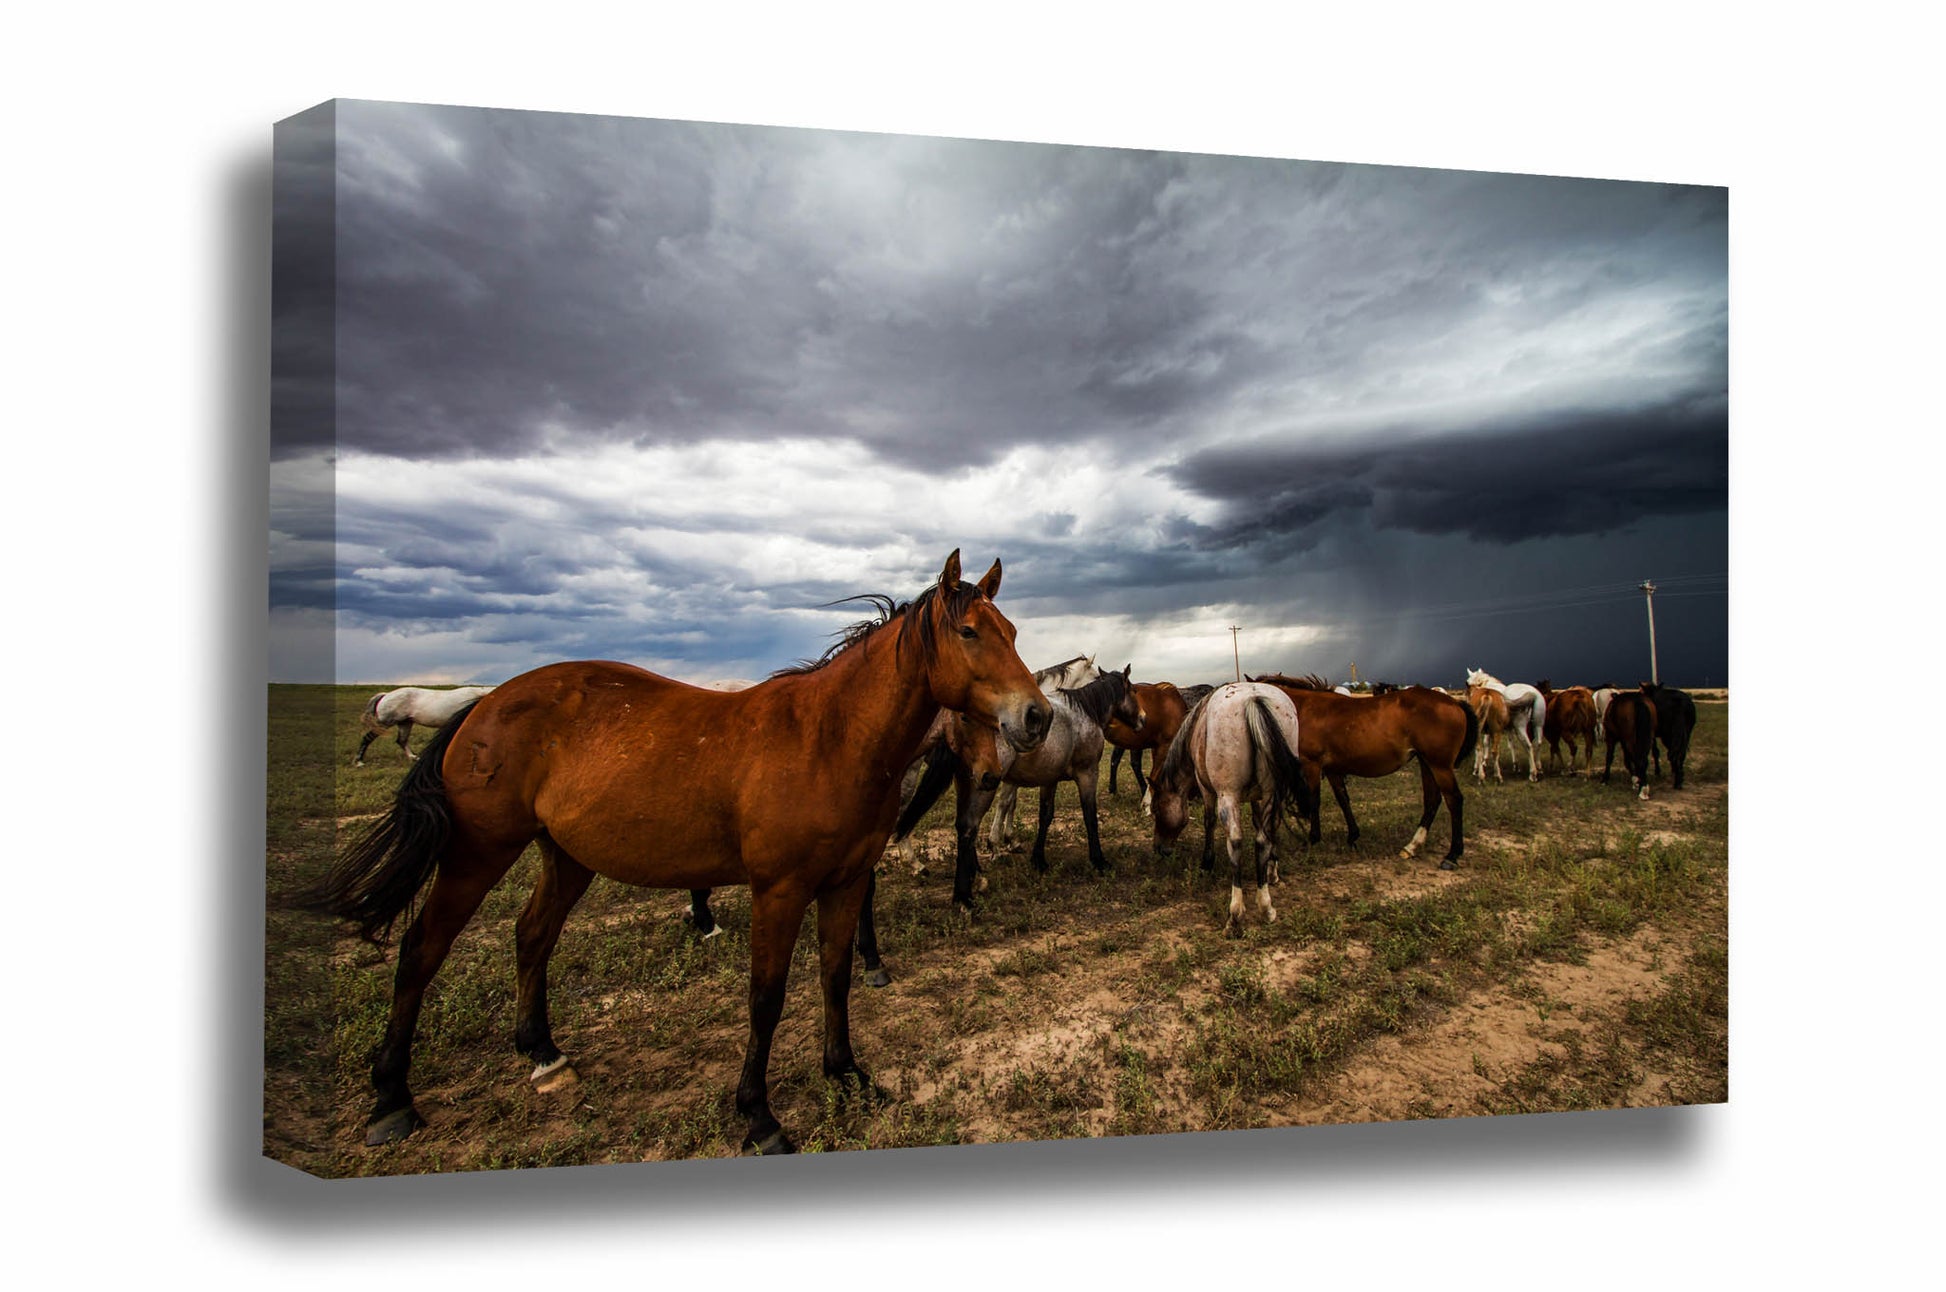 Equine canvas wall art of a horse watching over the herd as a storm approaches on a spring day in Oklahoma by Sean Ramsey of Southern Plains Photography.